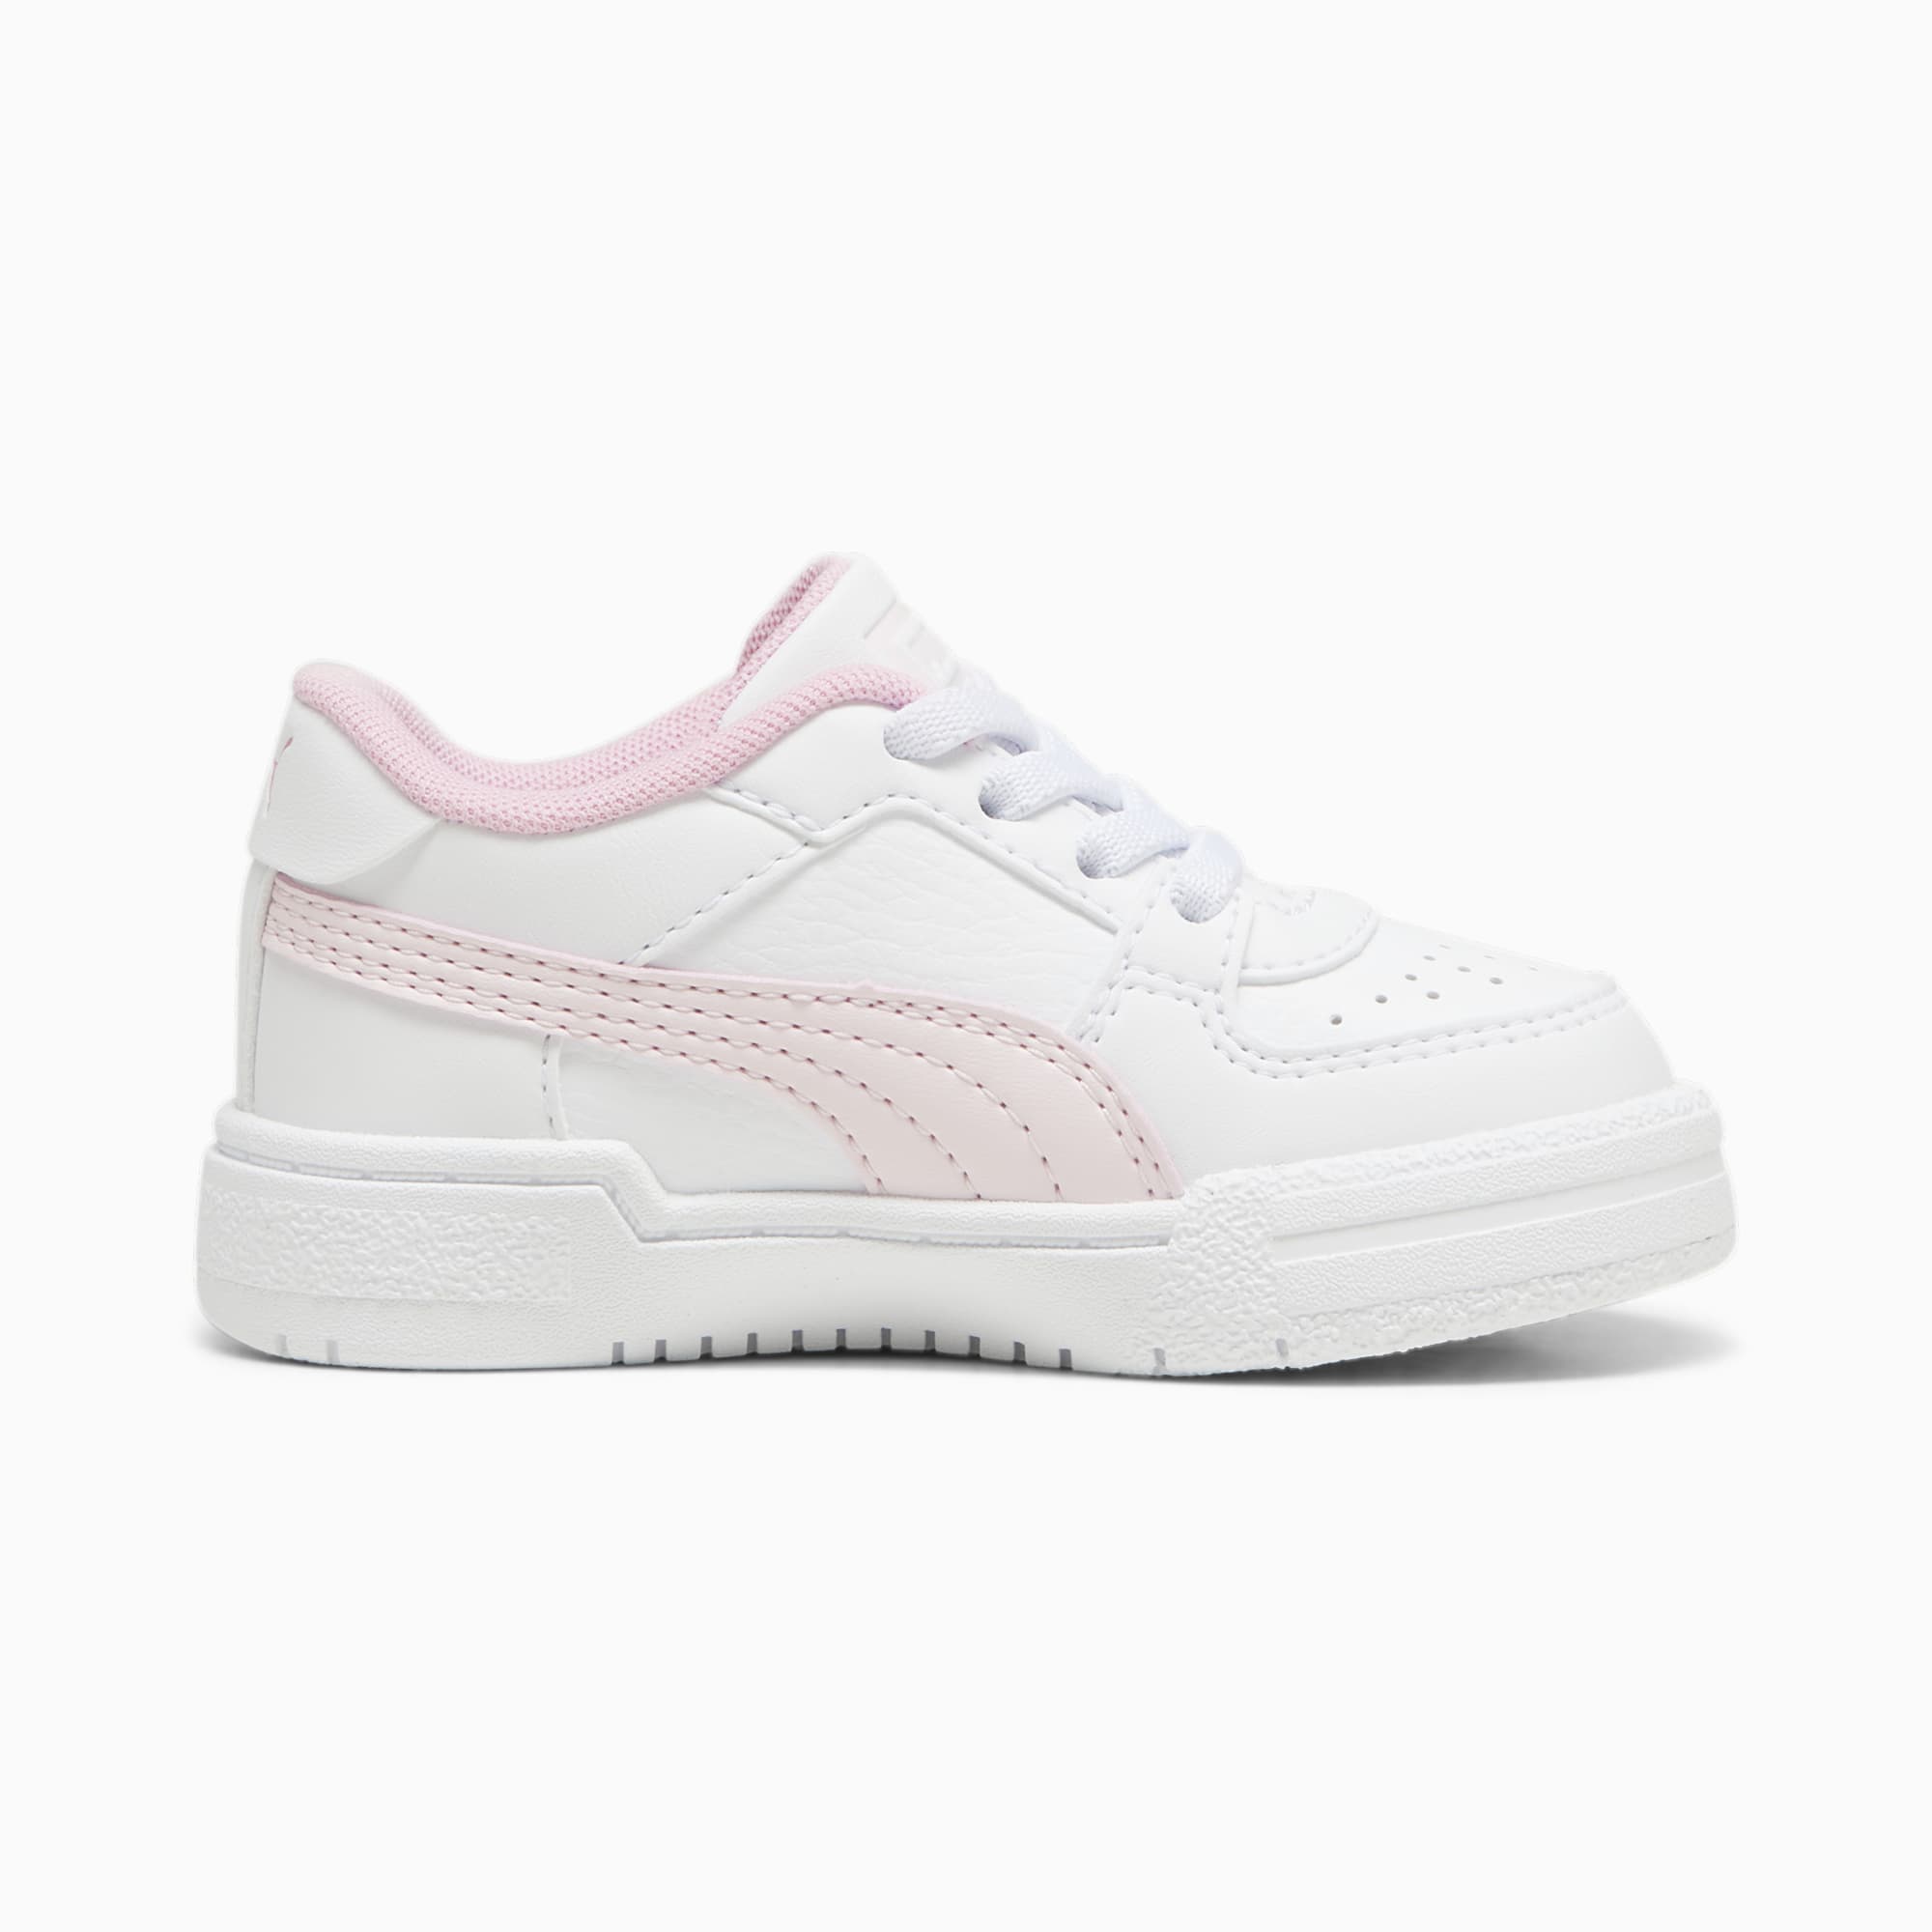 PUMA Ca Pro Classic AC Babies' Trainers, White/Whisp Of Pink